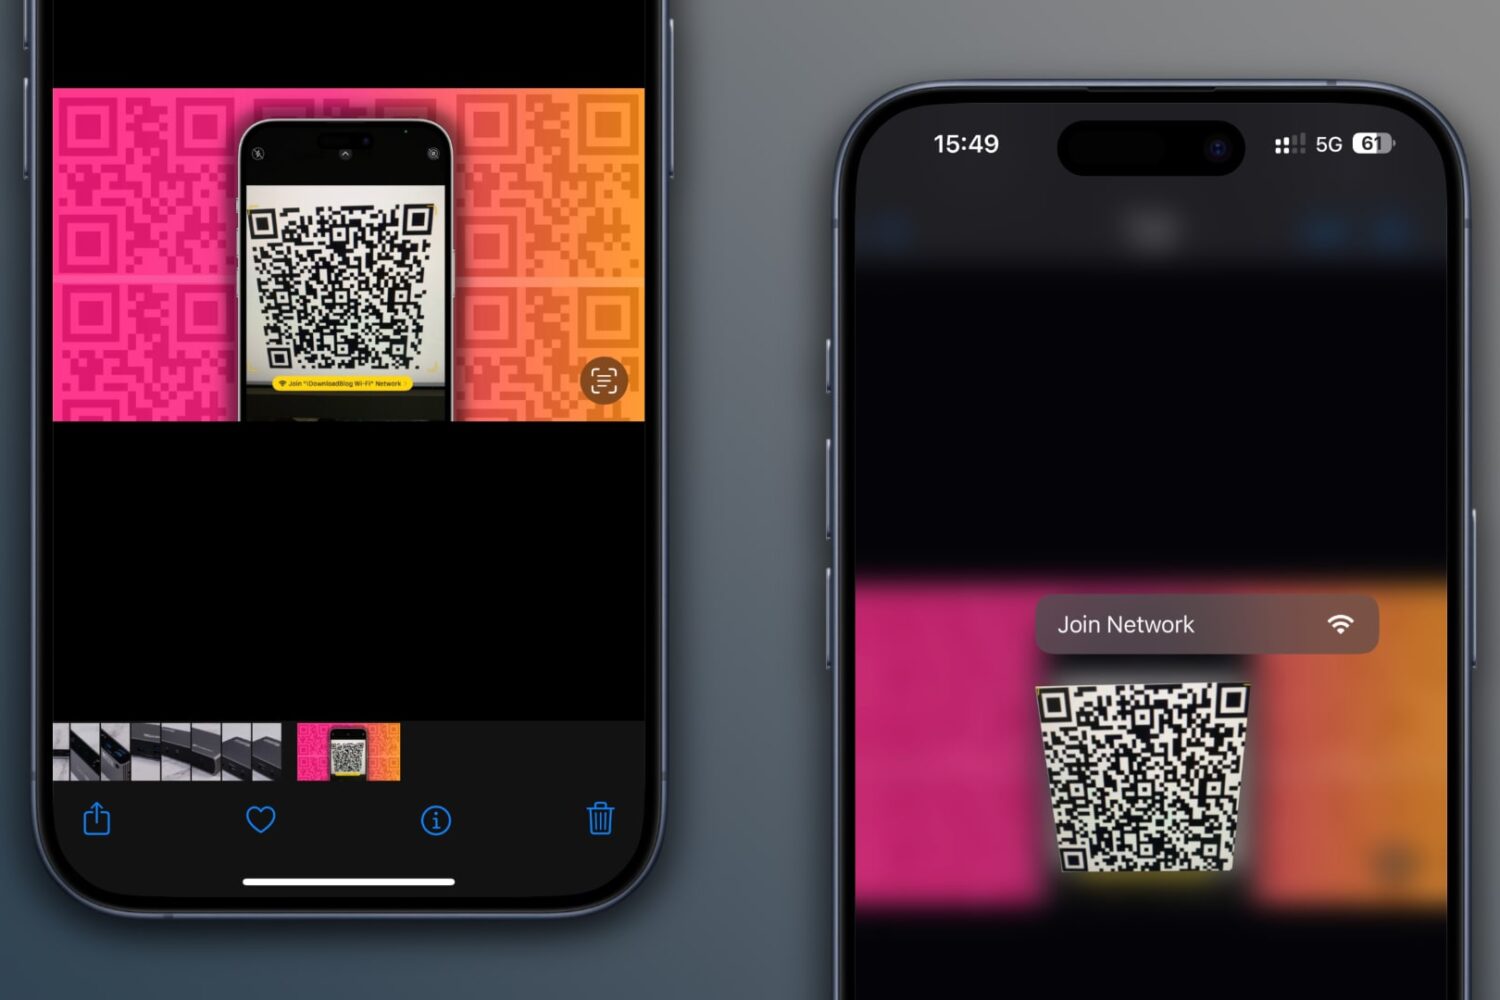 Scanning QR code from an image in the iPhone's Photos app to join a Wi-Fi network